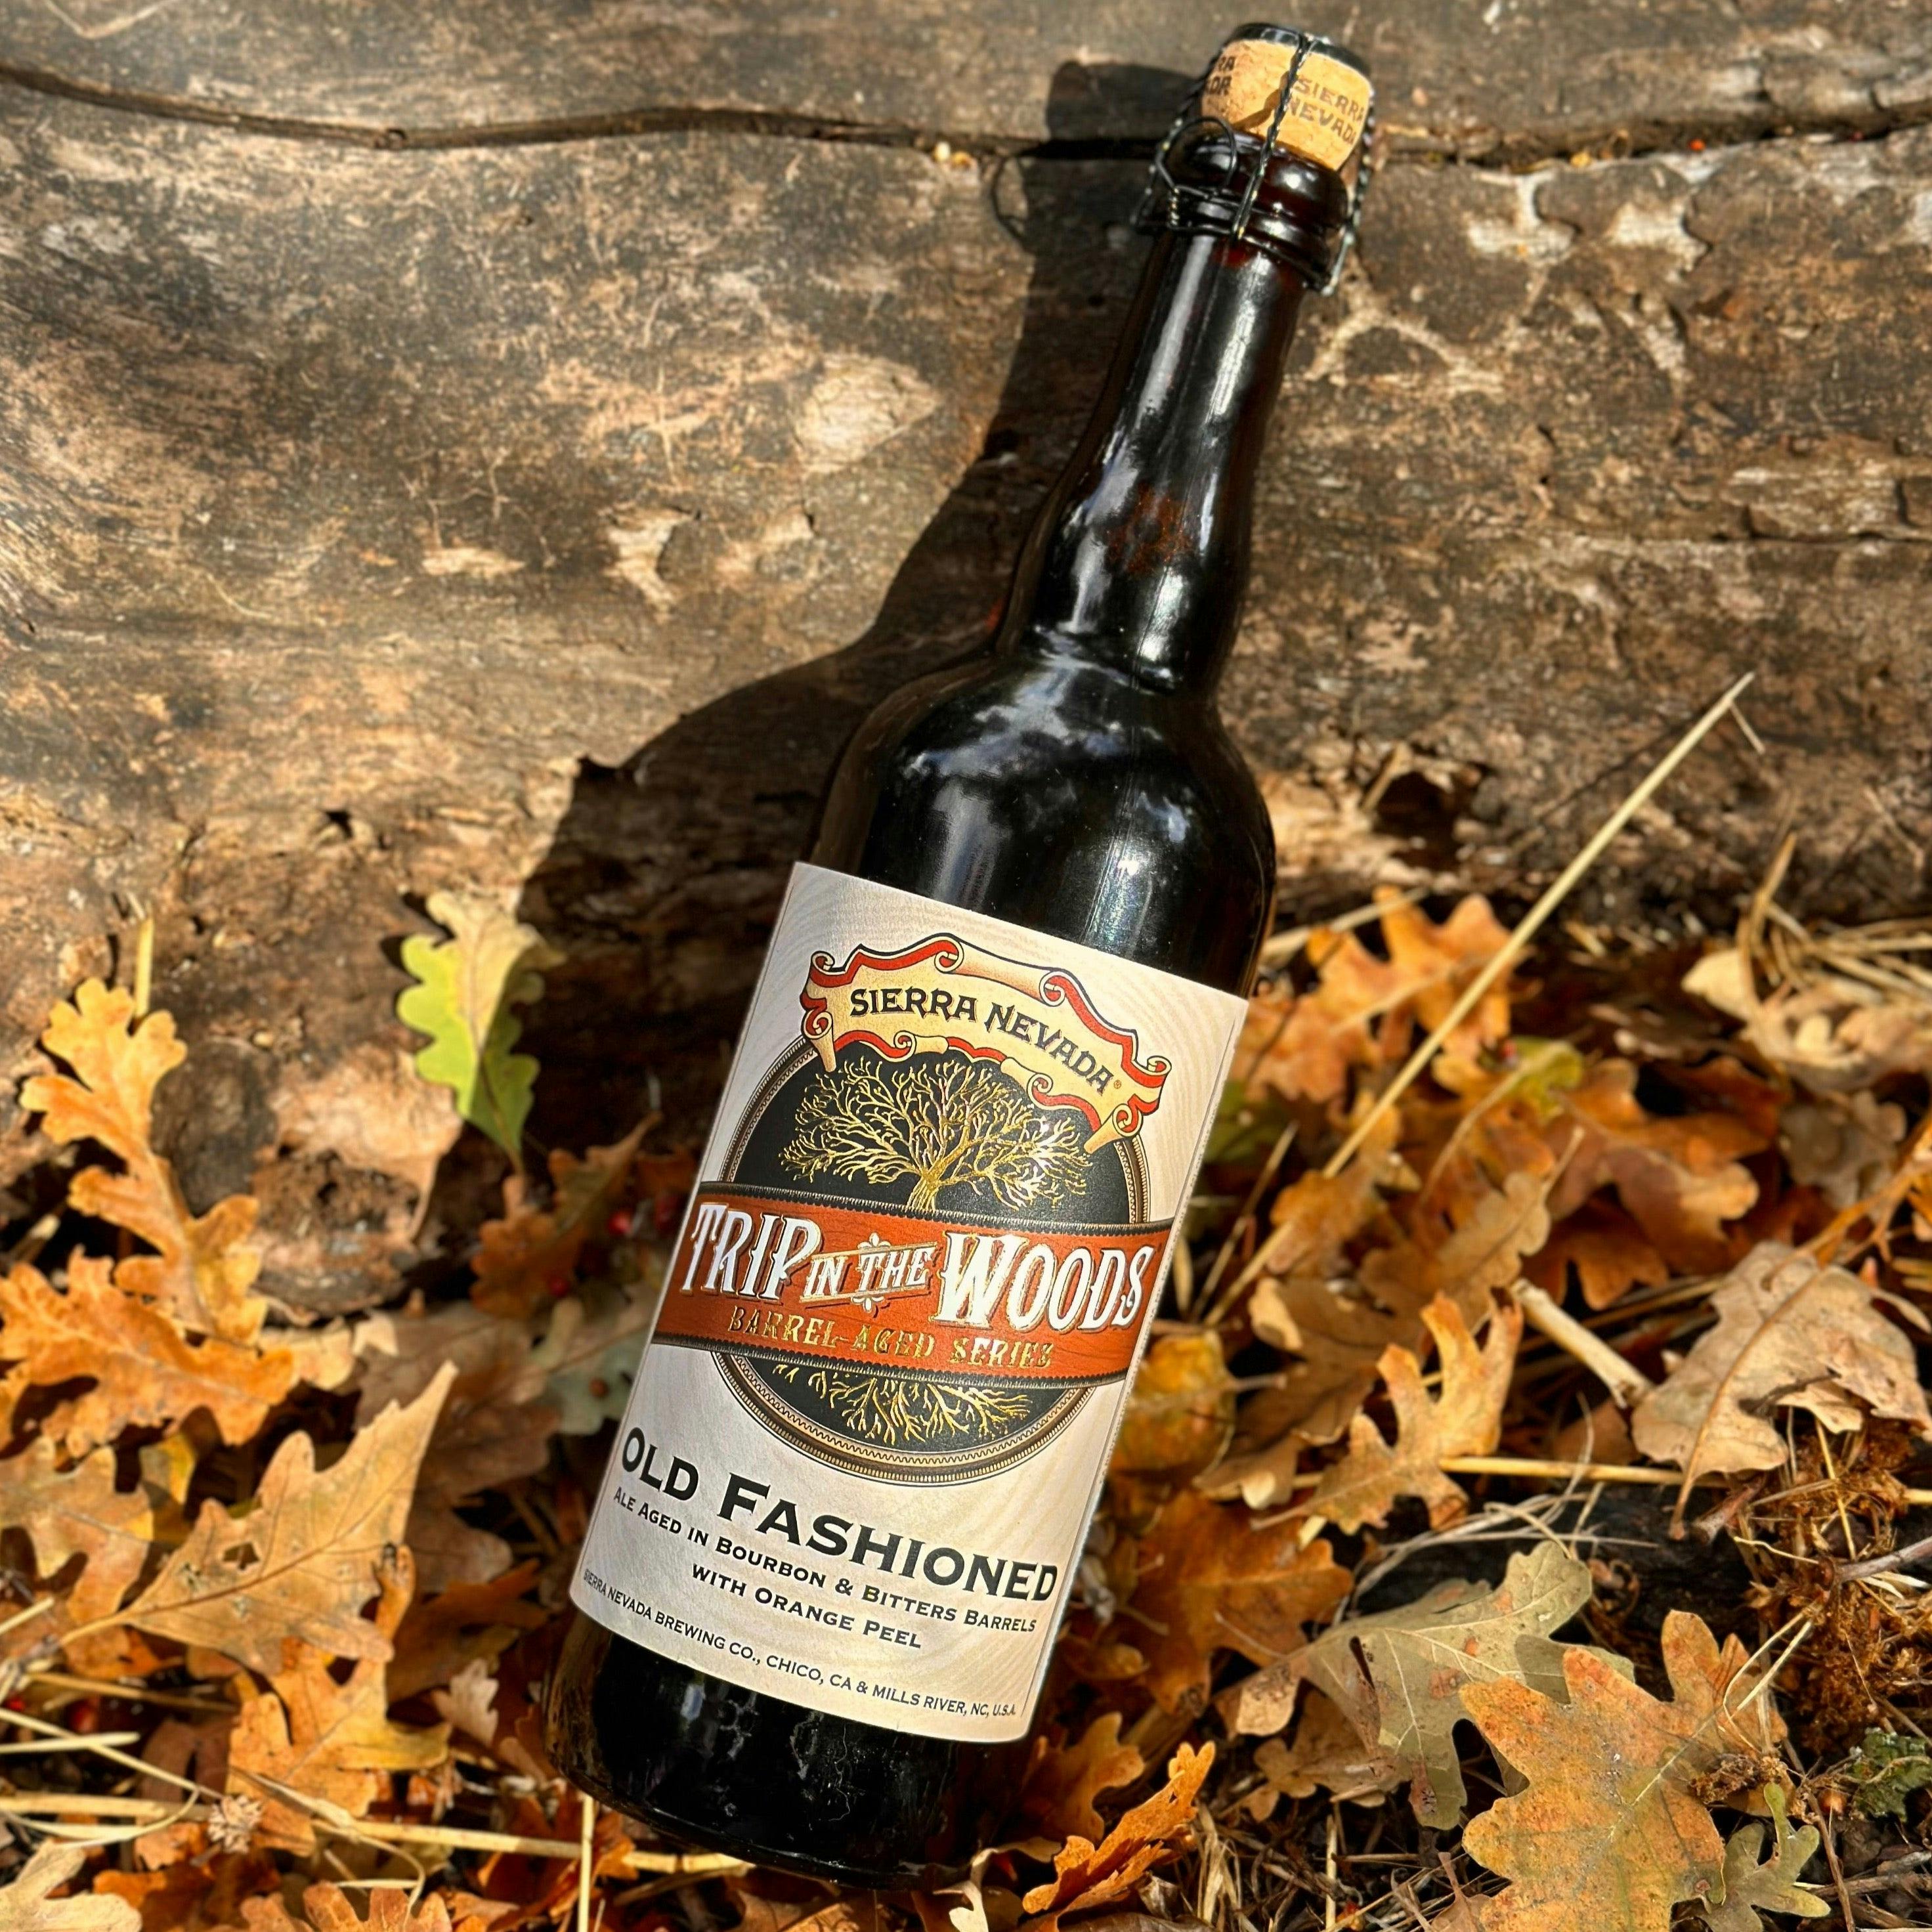 Sierra Nevada Brewing Co. Trip In The Woods Old Fashioned 750 mL bottle in a fall setting with colorful leaves